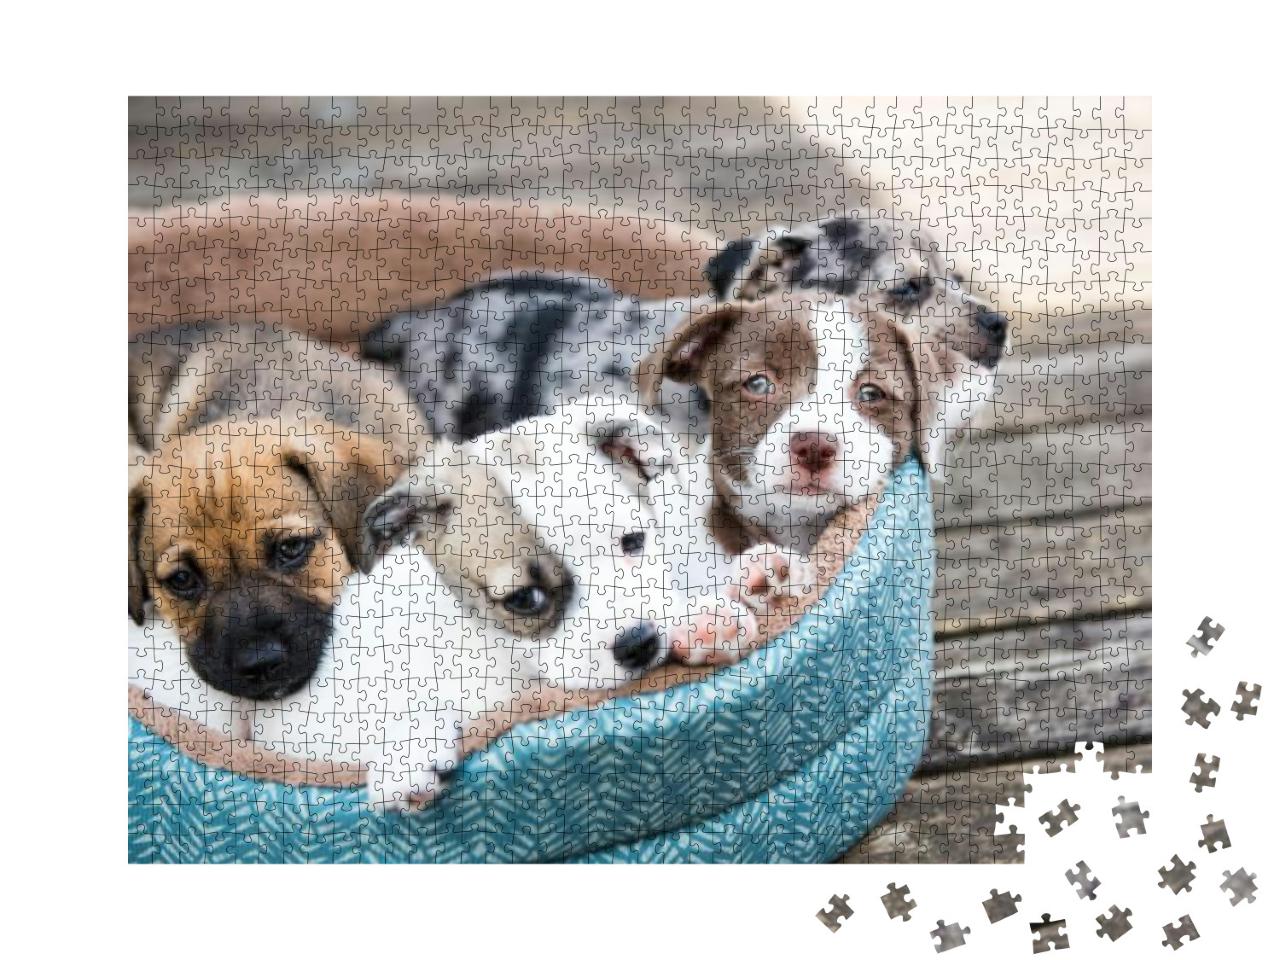 Litter of Terrier Mix Puppies Playing in Dog Bed Outside... Jigsaw Puzzle with 1000 pieces